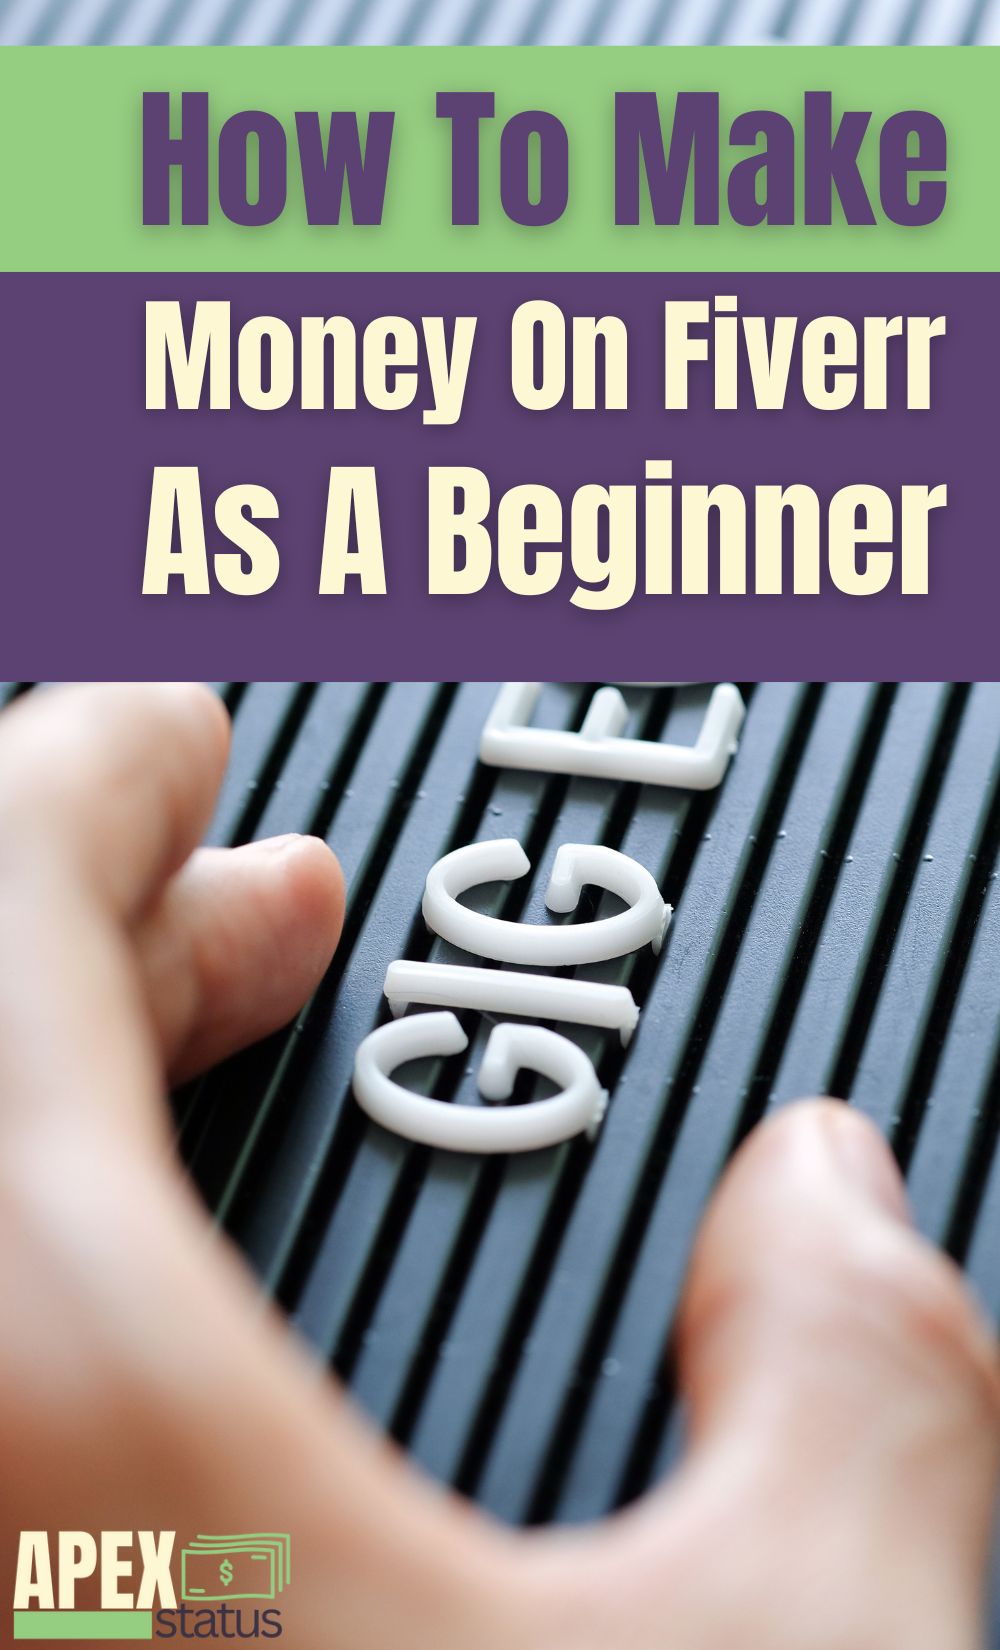 Fiverr Gig Ideas and Tips